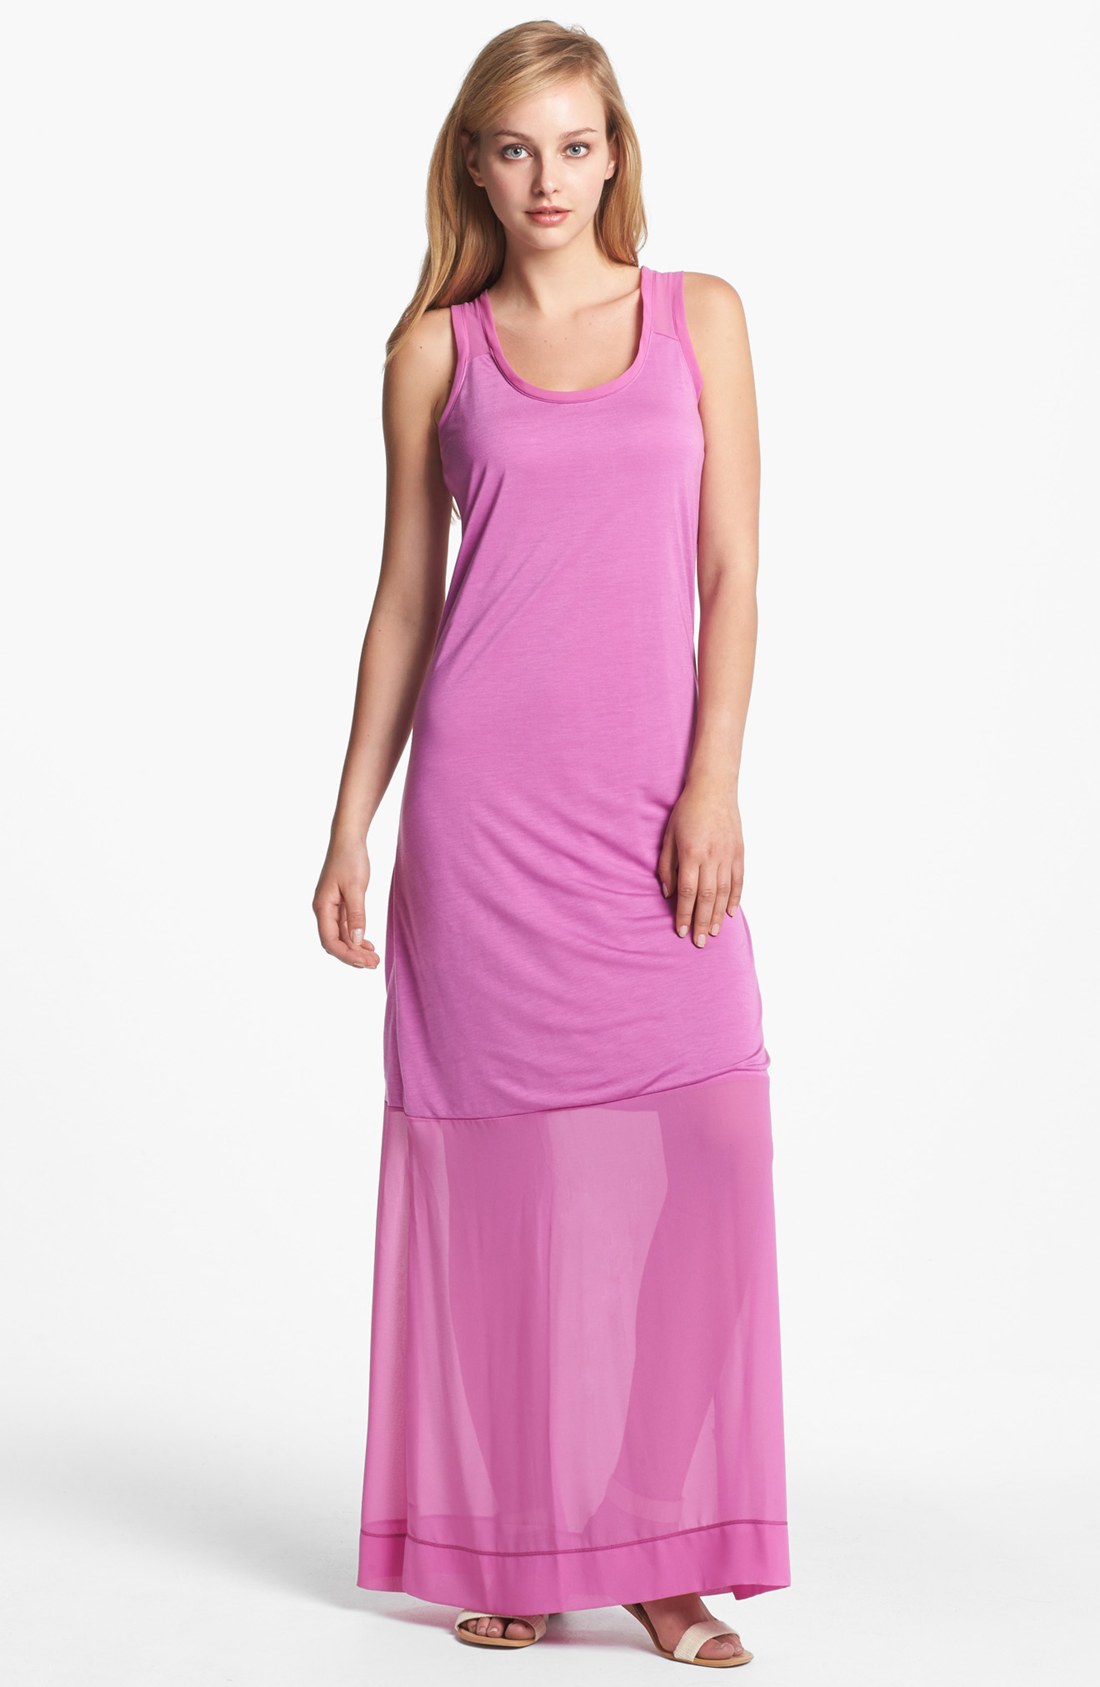 Dkny Mixed Media Maxi Dress in Pink (fresh orchid) | Lyst